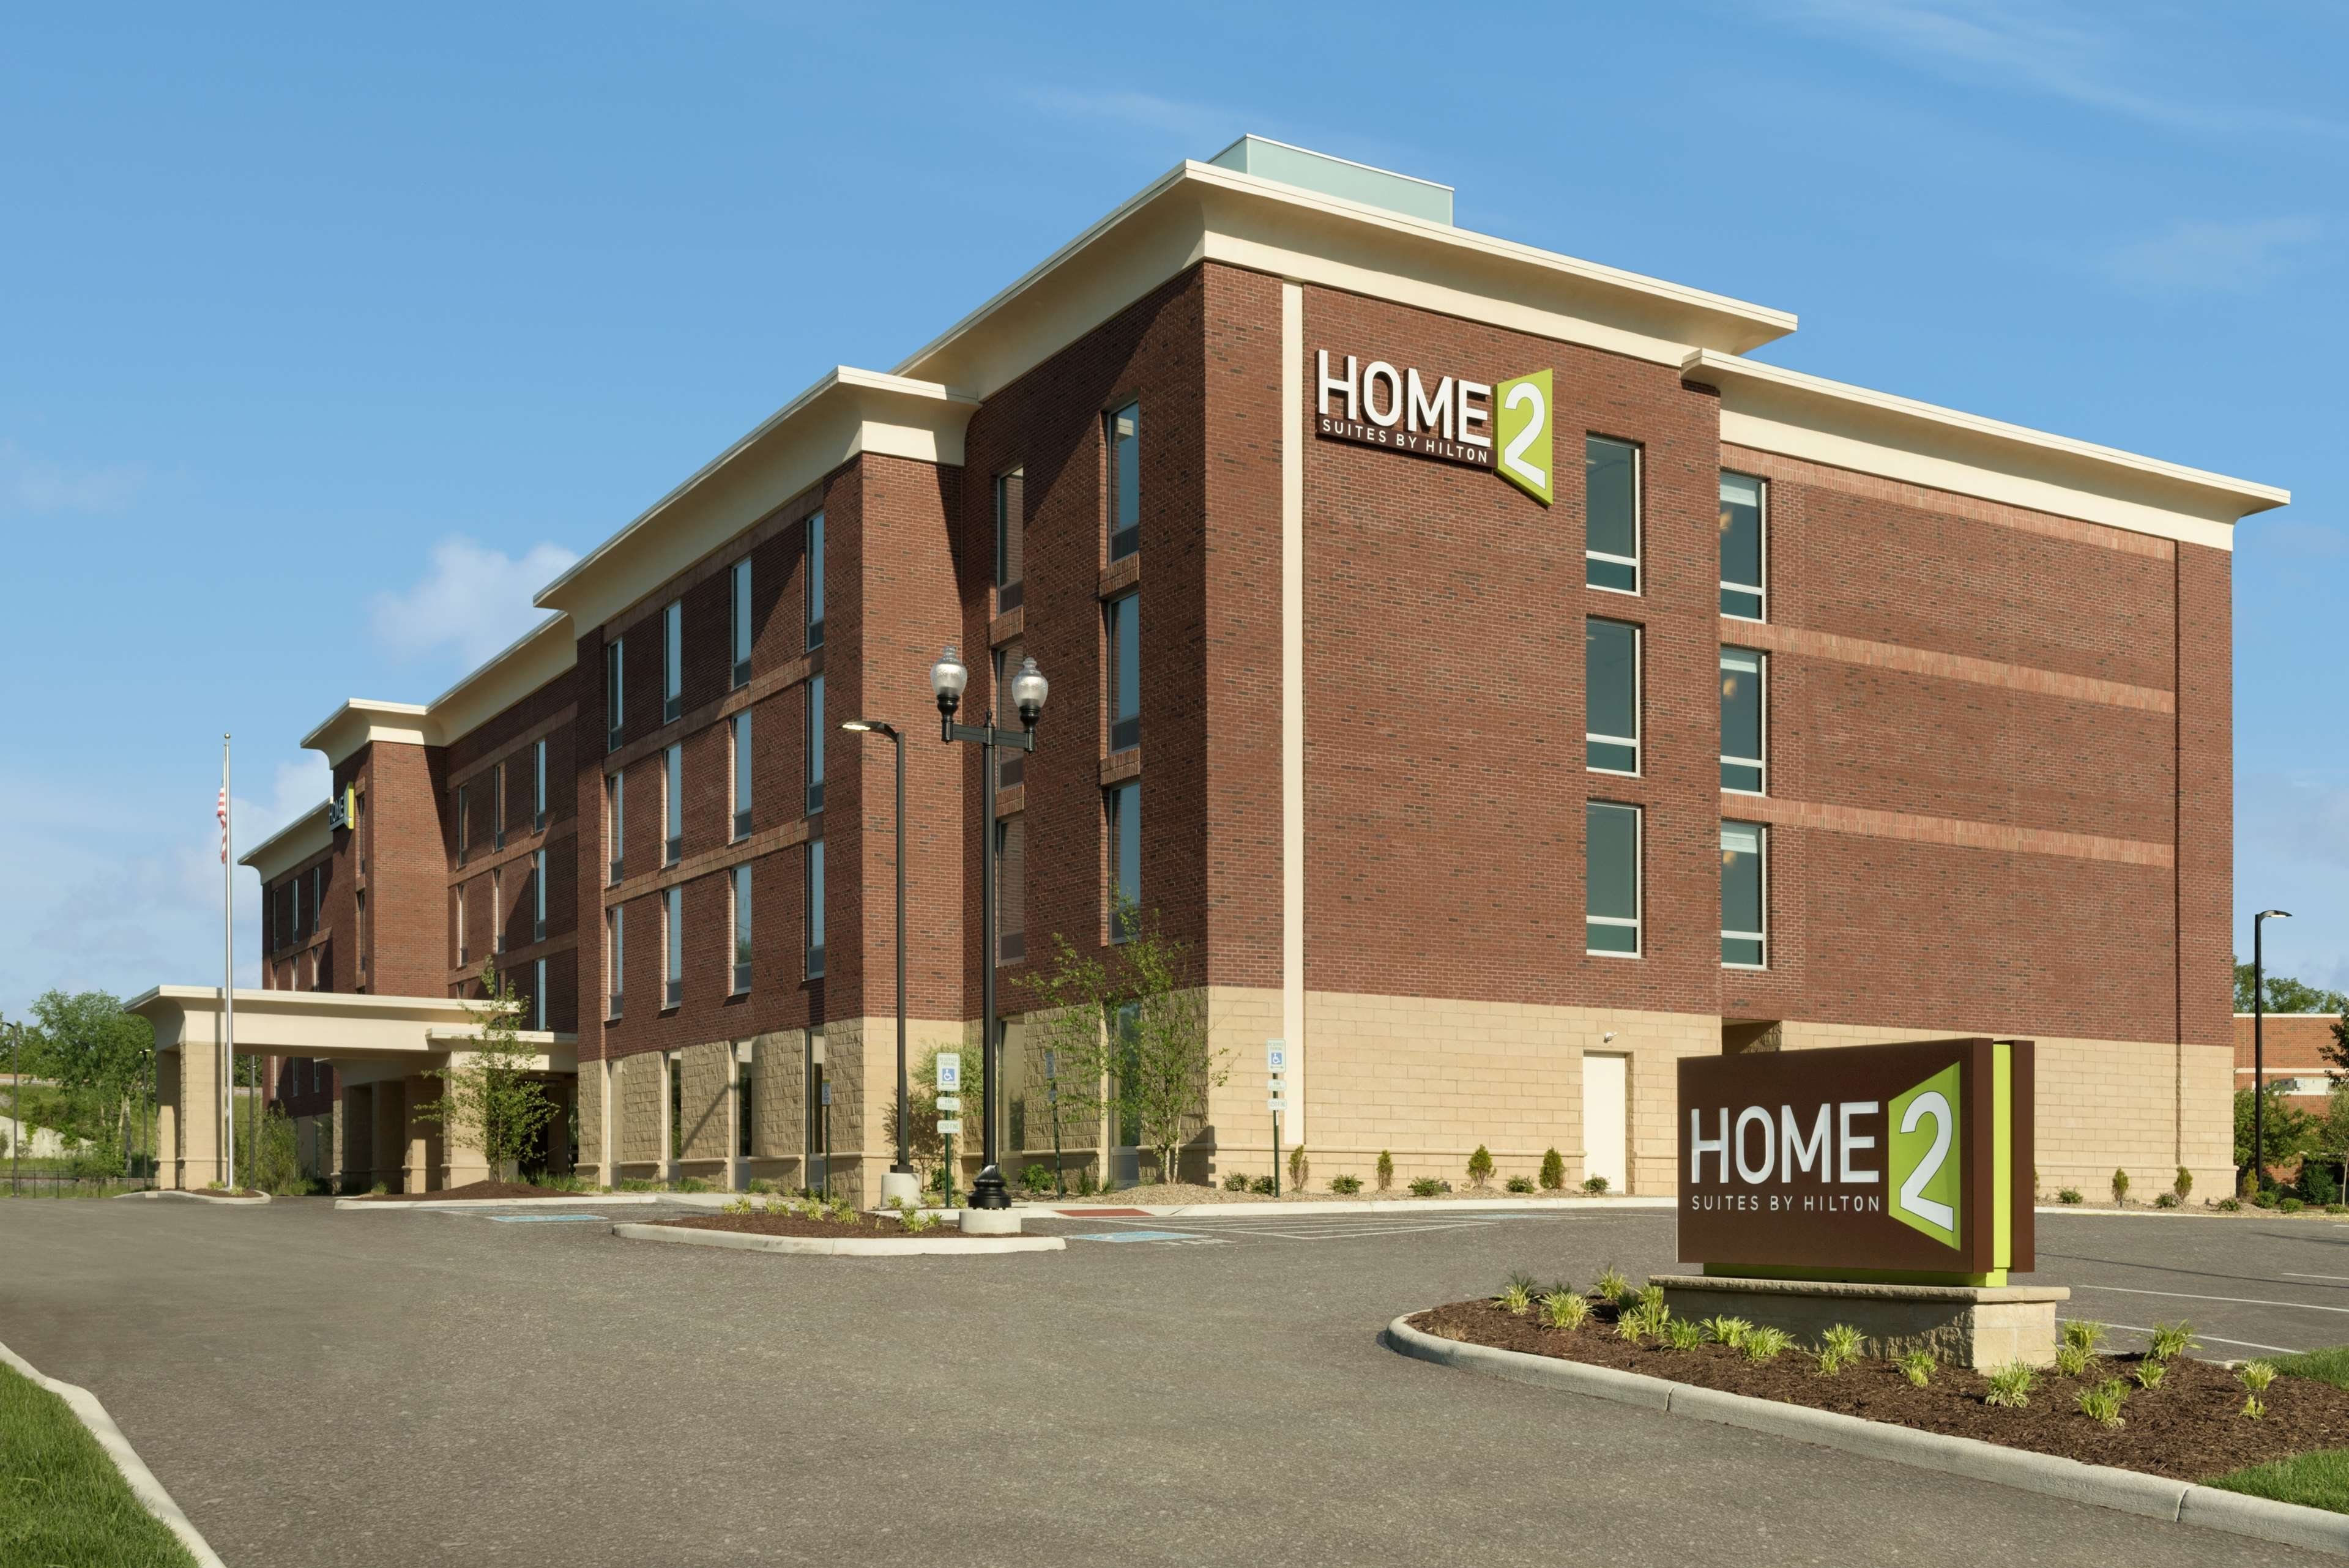 Home2 Suites by Hilton Middleburg Heights Cleveland image